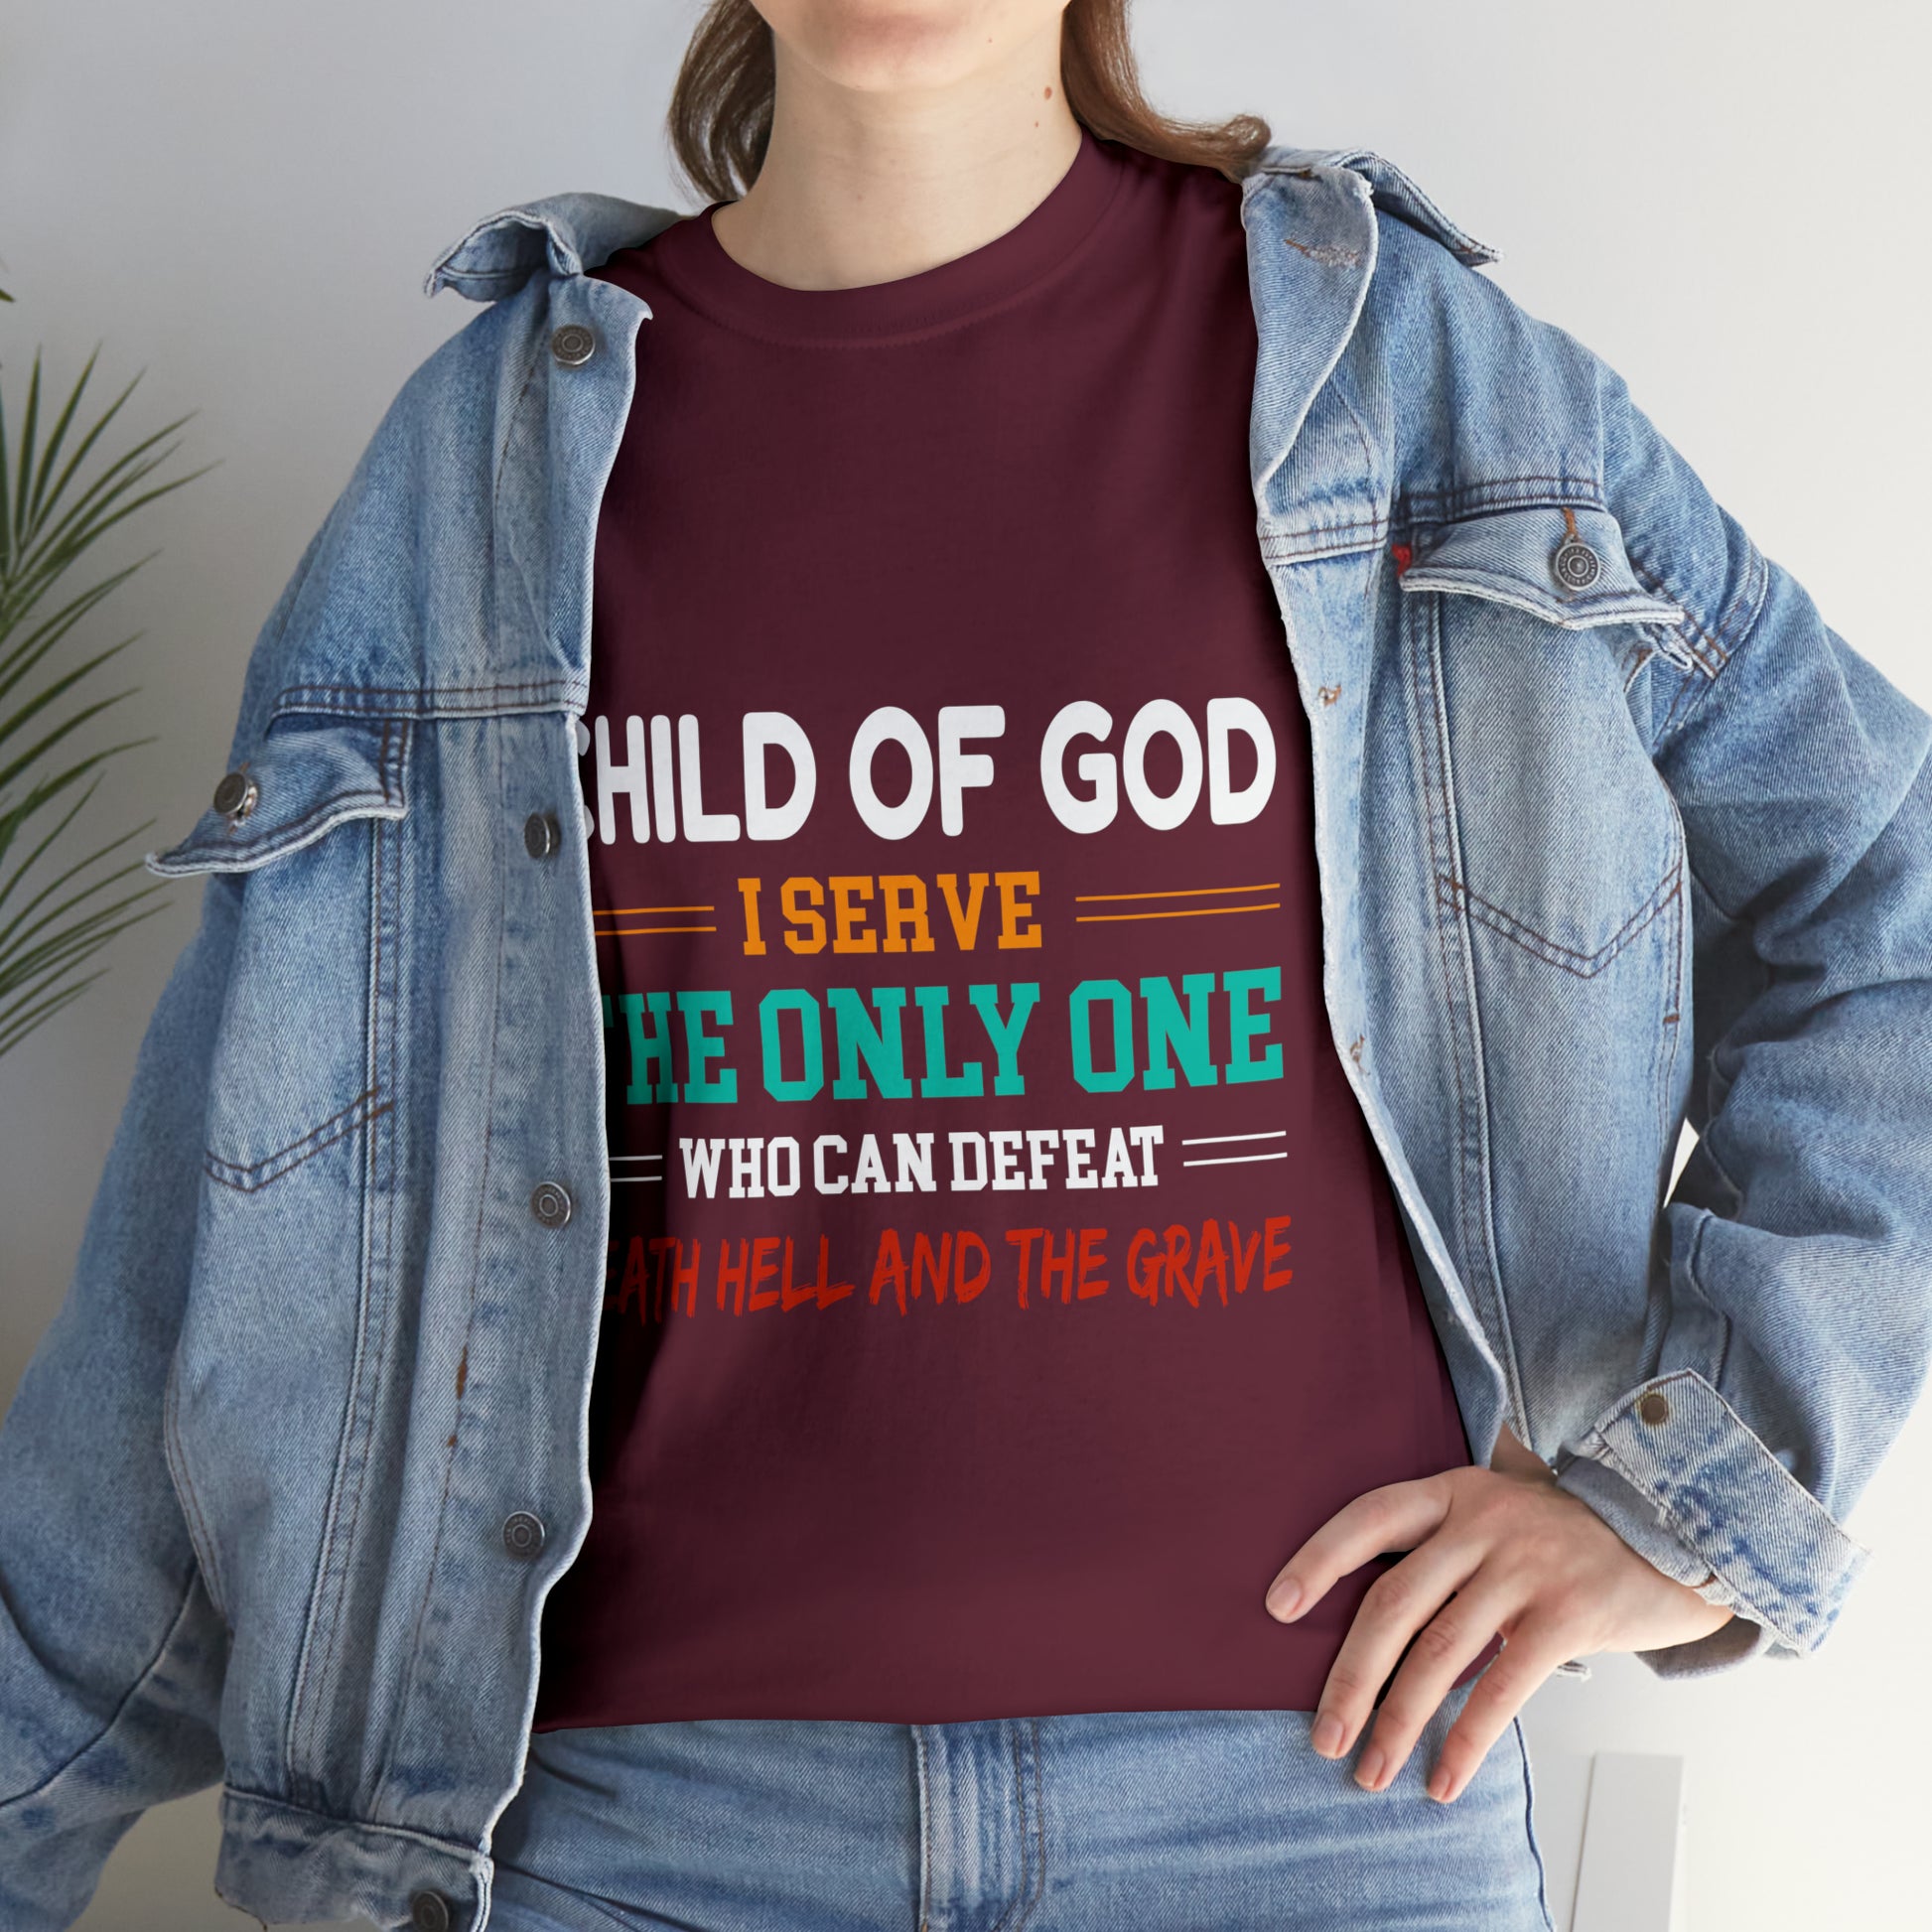 Child Of God I Serve The Only One Who Can Defeat Death Hell And The Grave Unisex Heavy Cotton Tee Printify